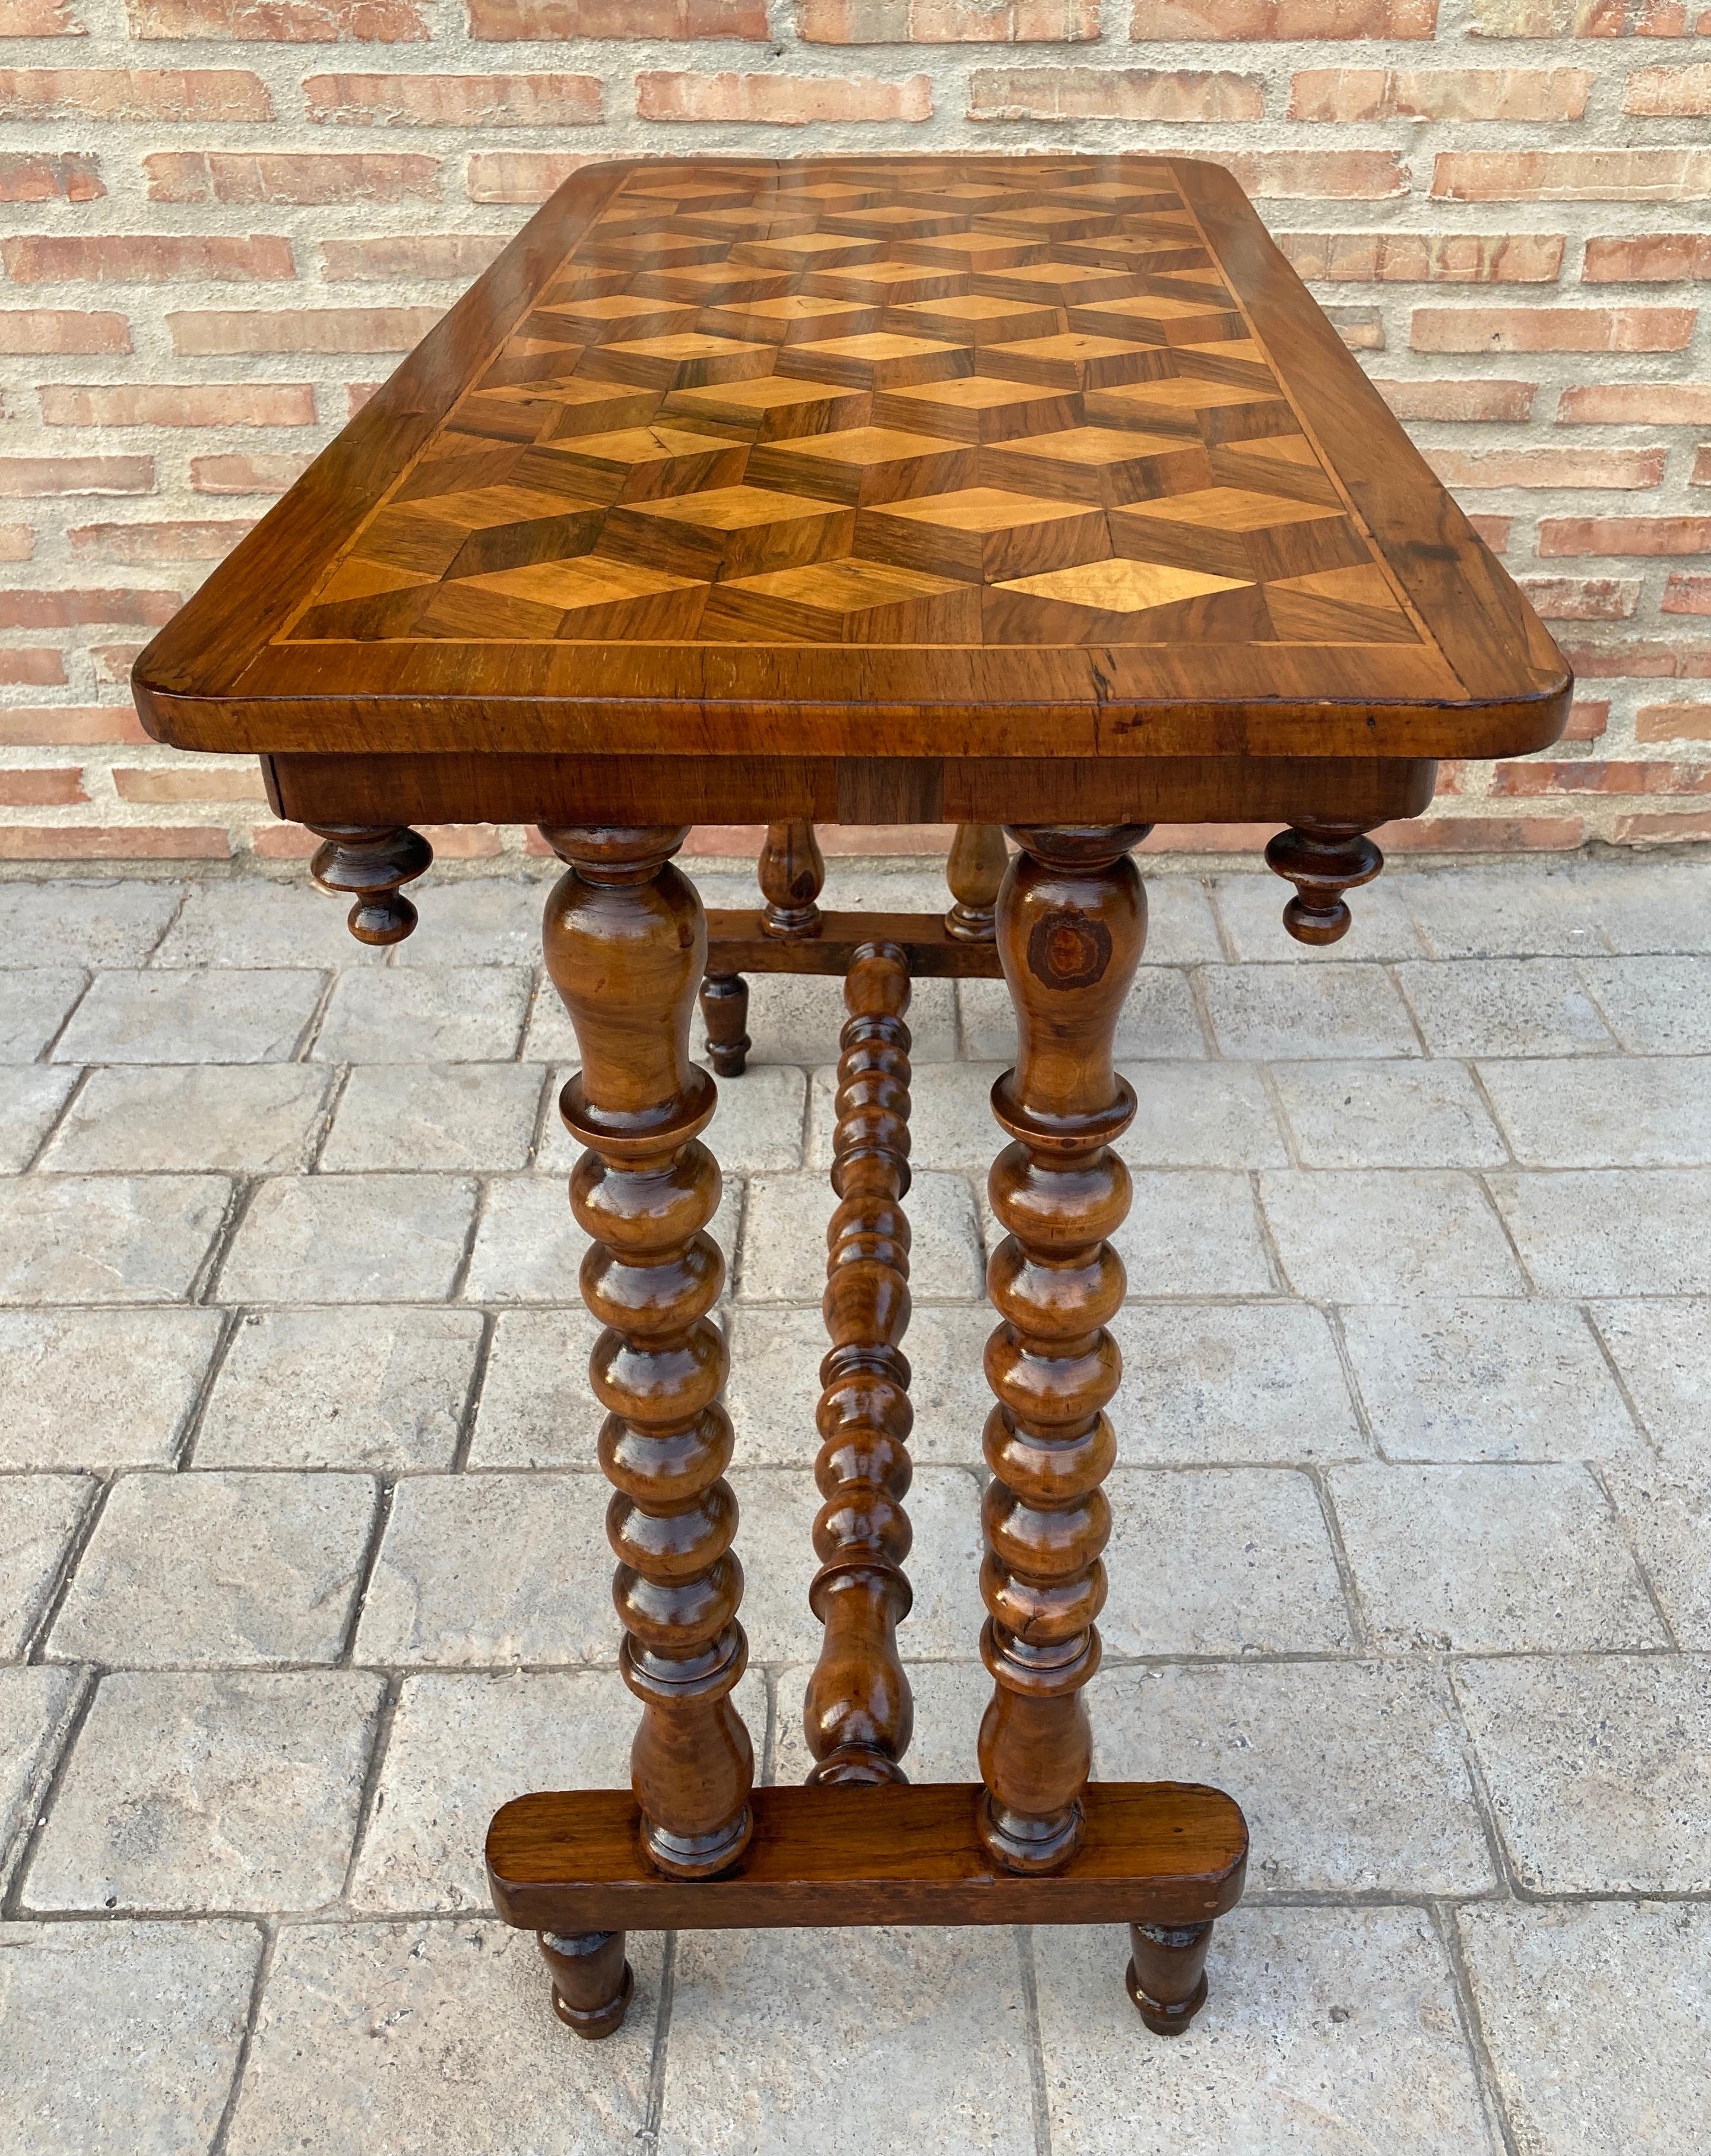 19th Century Spanish Console Table with Parquetry Top and Turned Legs In Good Condition For Sale In Miami, FL